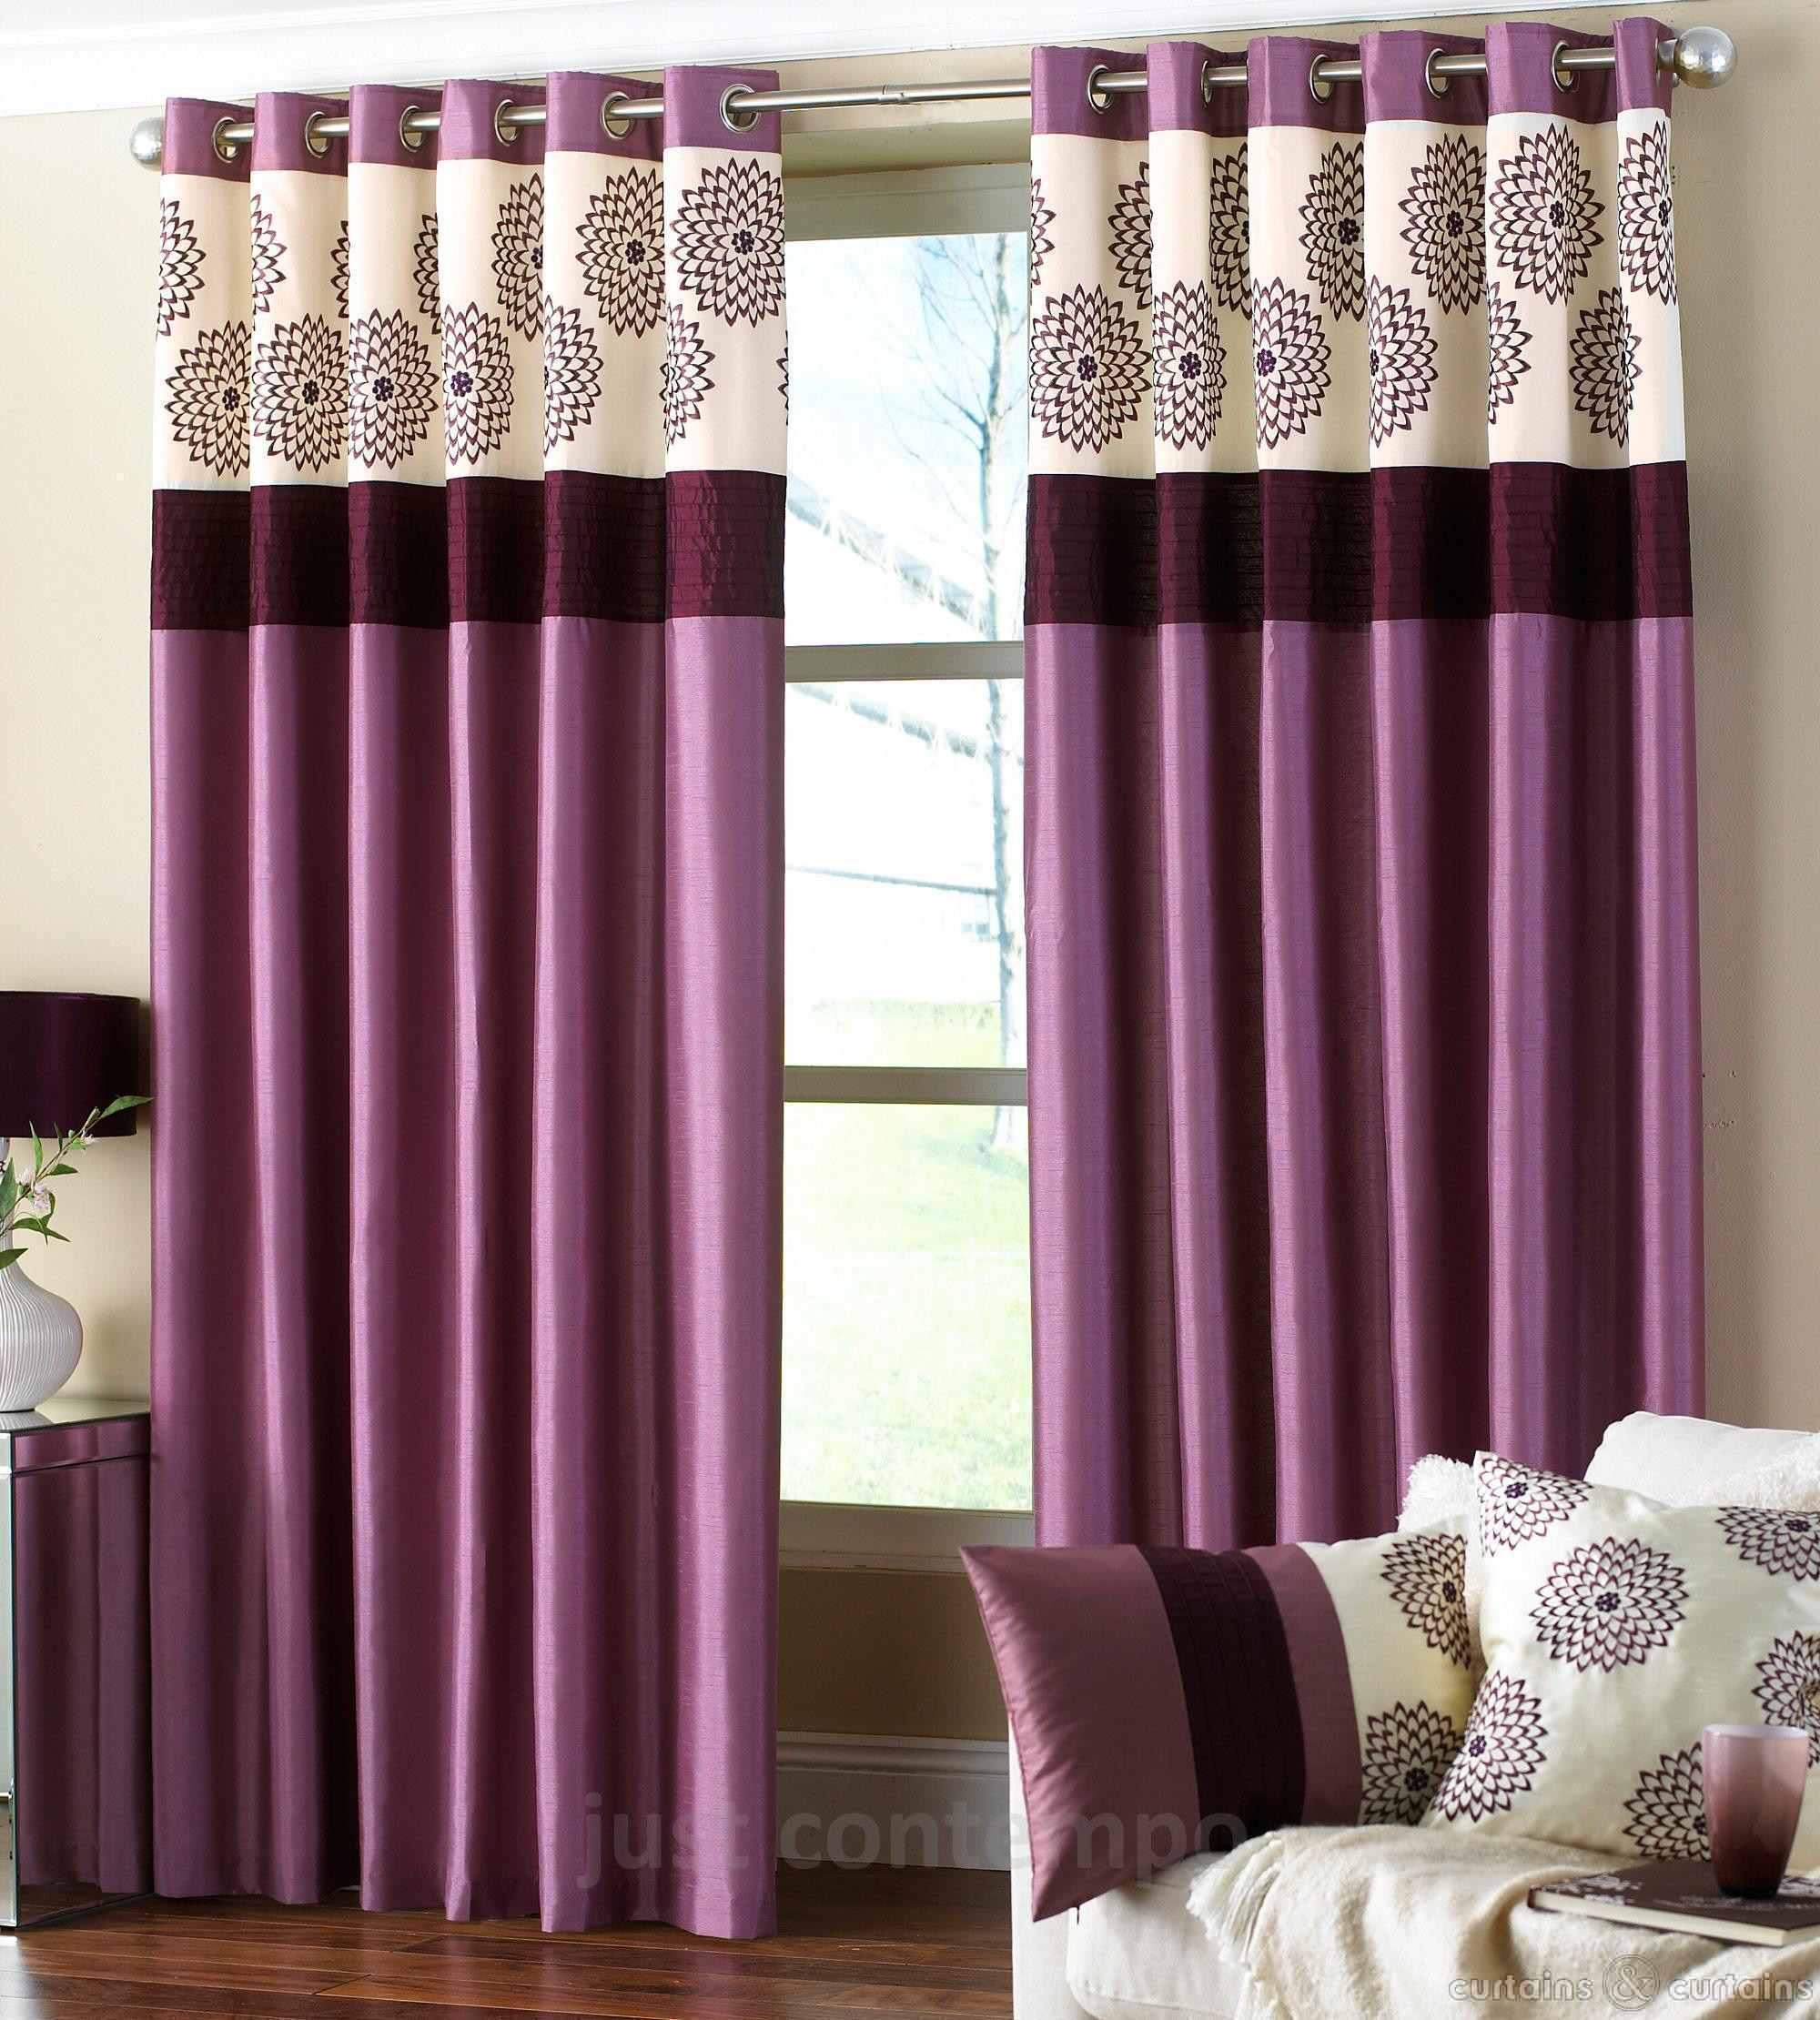 Living Room Curtains Design
 Choosing Curtain Designs Think of These 4 Aspects